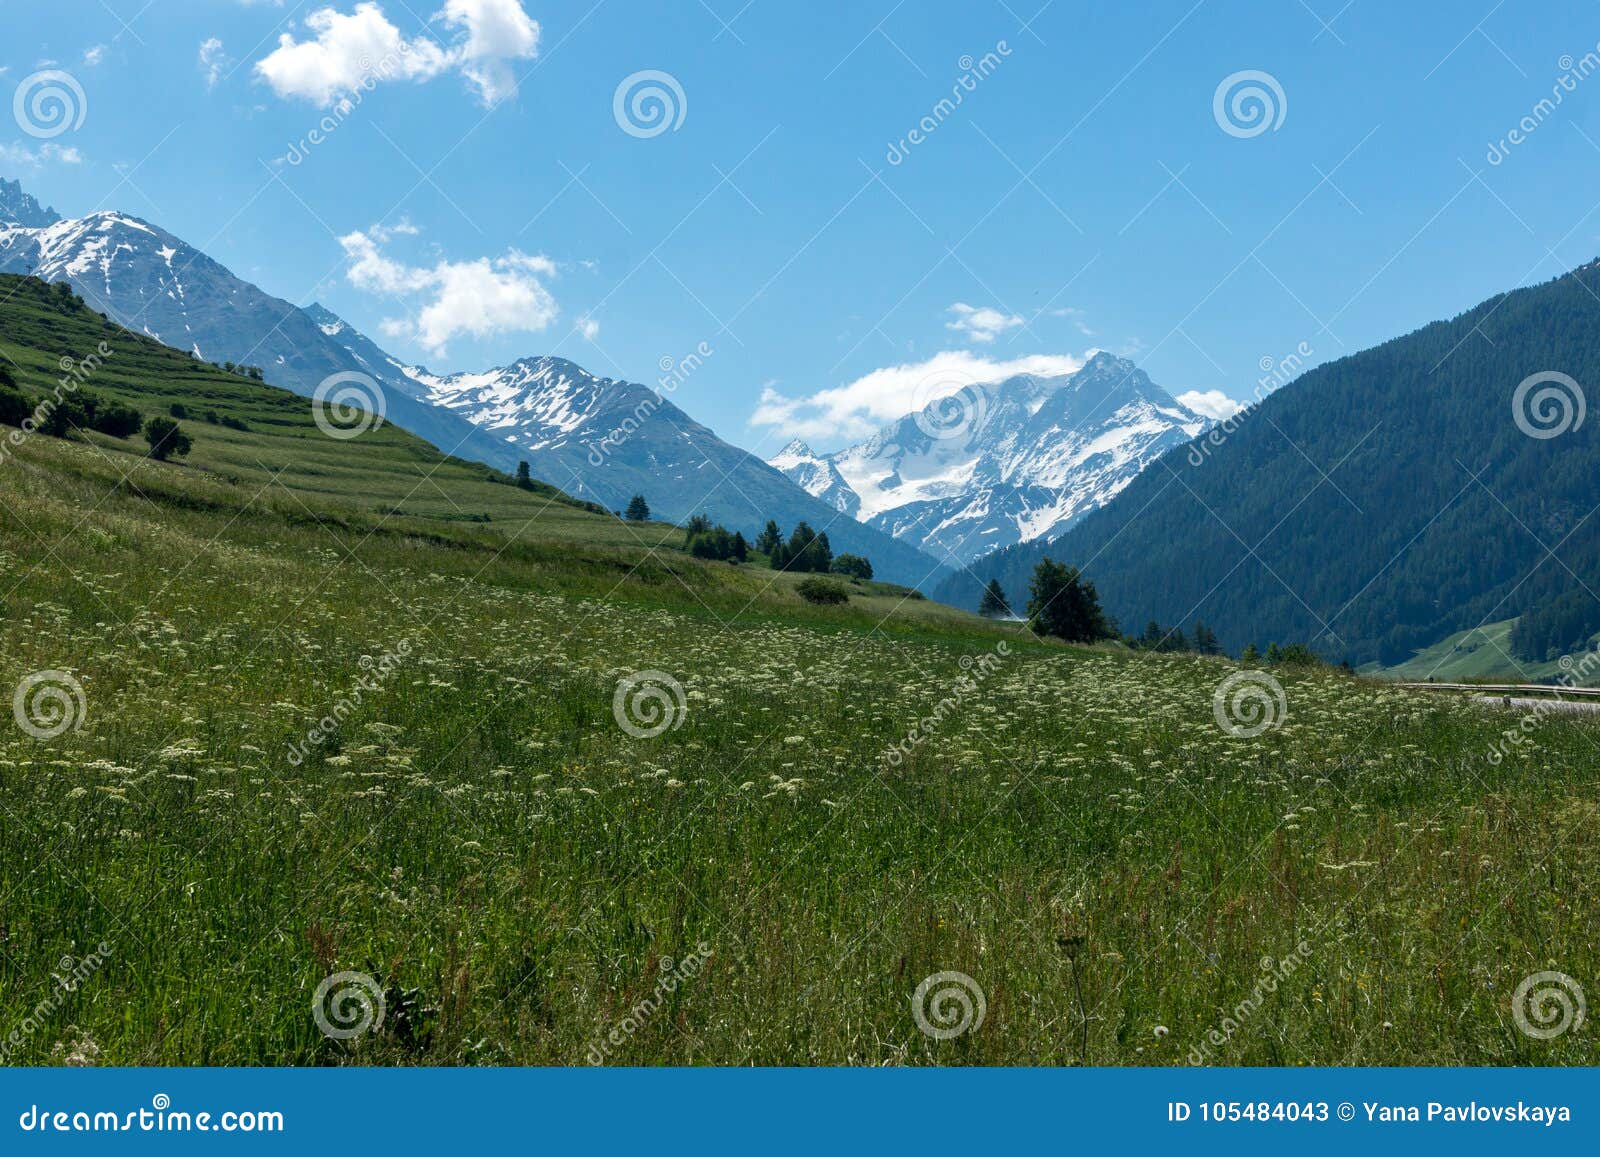 Beautiful Green Valley With Covered Snow Mountain Peaks Stock Image